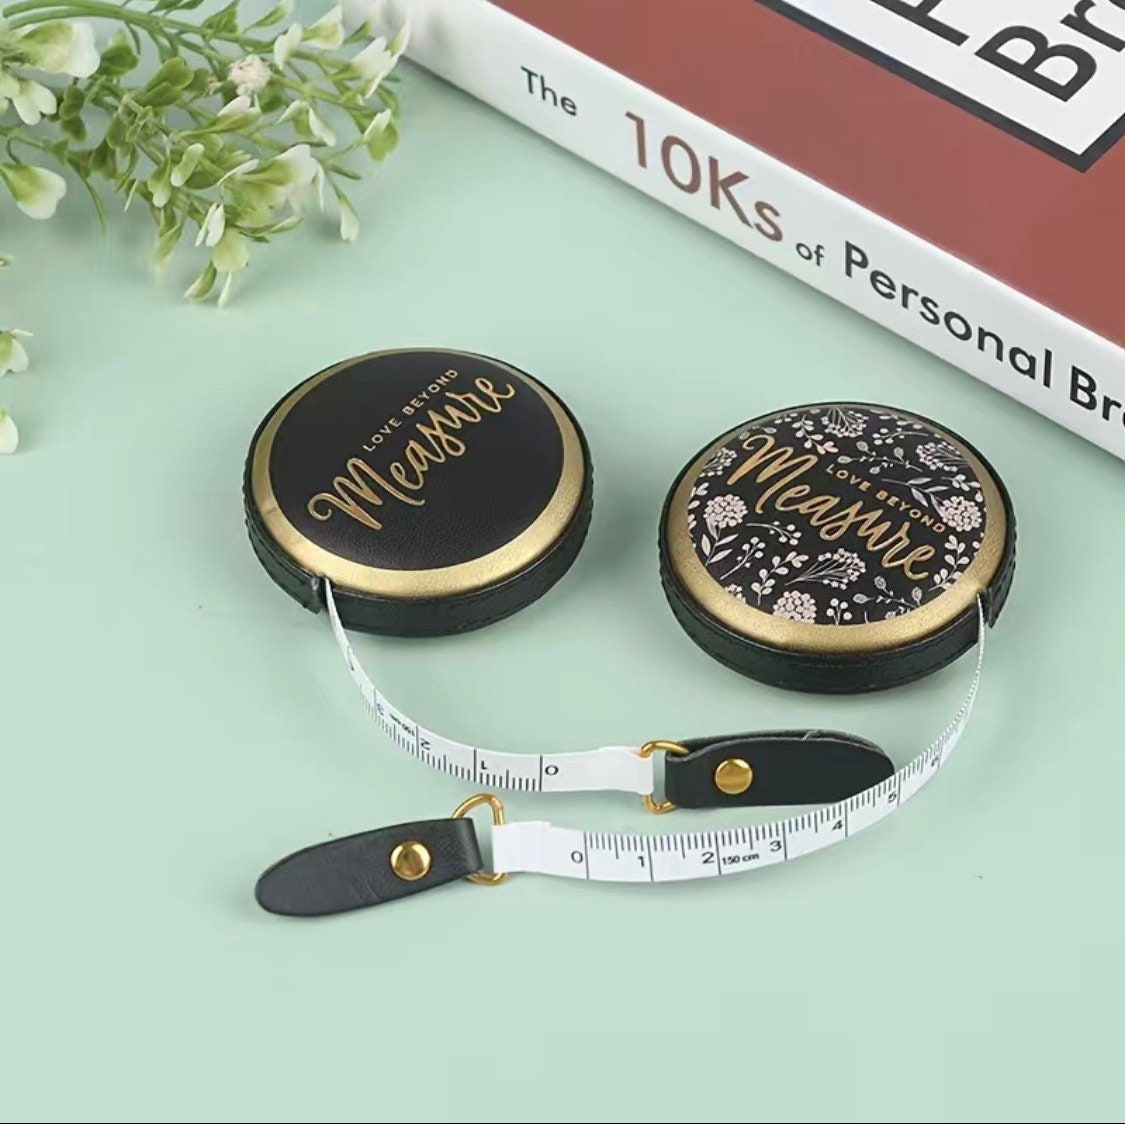 Wholesale Portable Retractable Sewing Mini Retractable Tape Measure Mini  150cm Size For Shopping And Measuring VTKY2259 From Besgo, $0.33